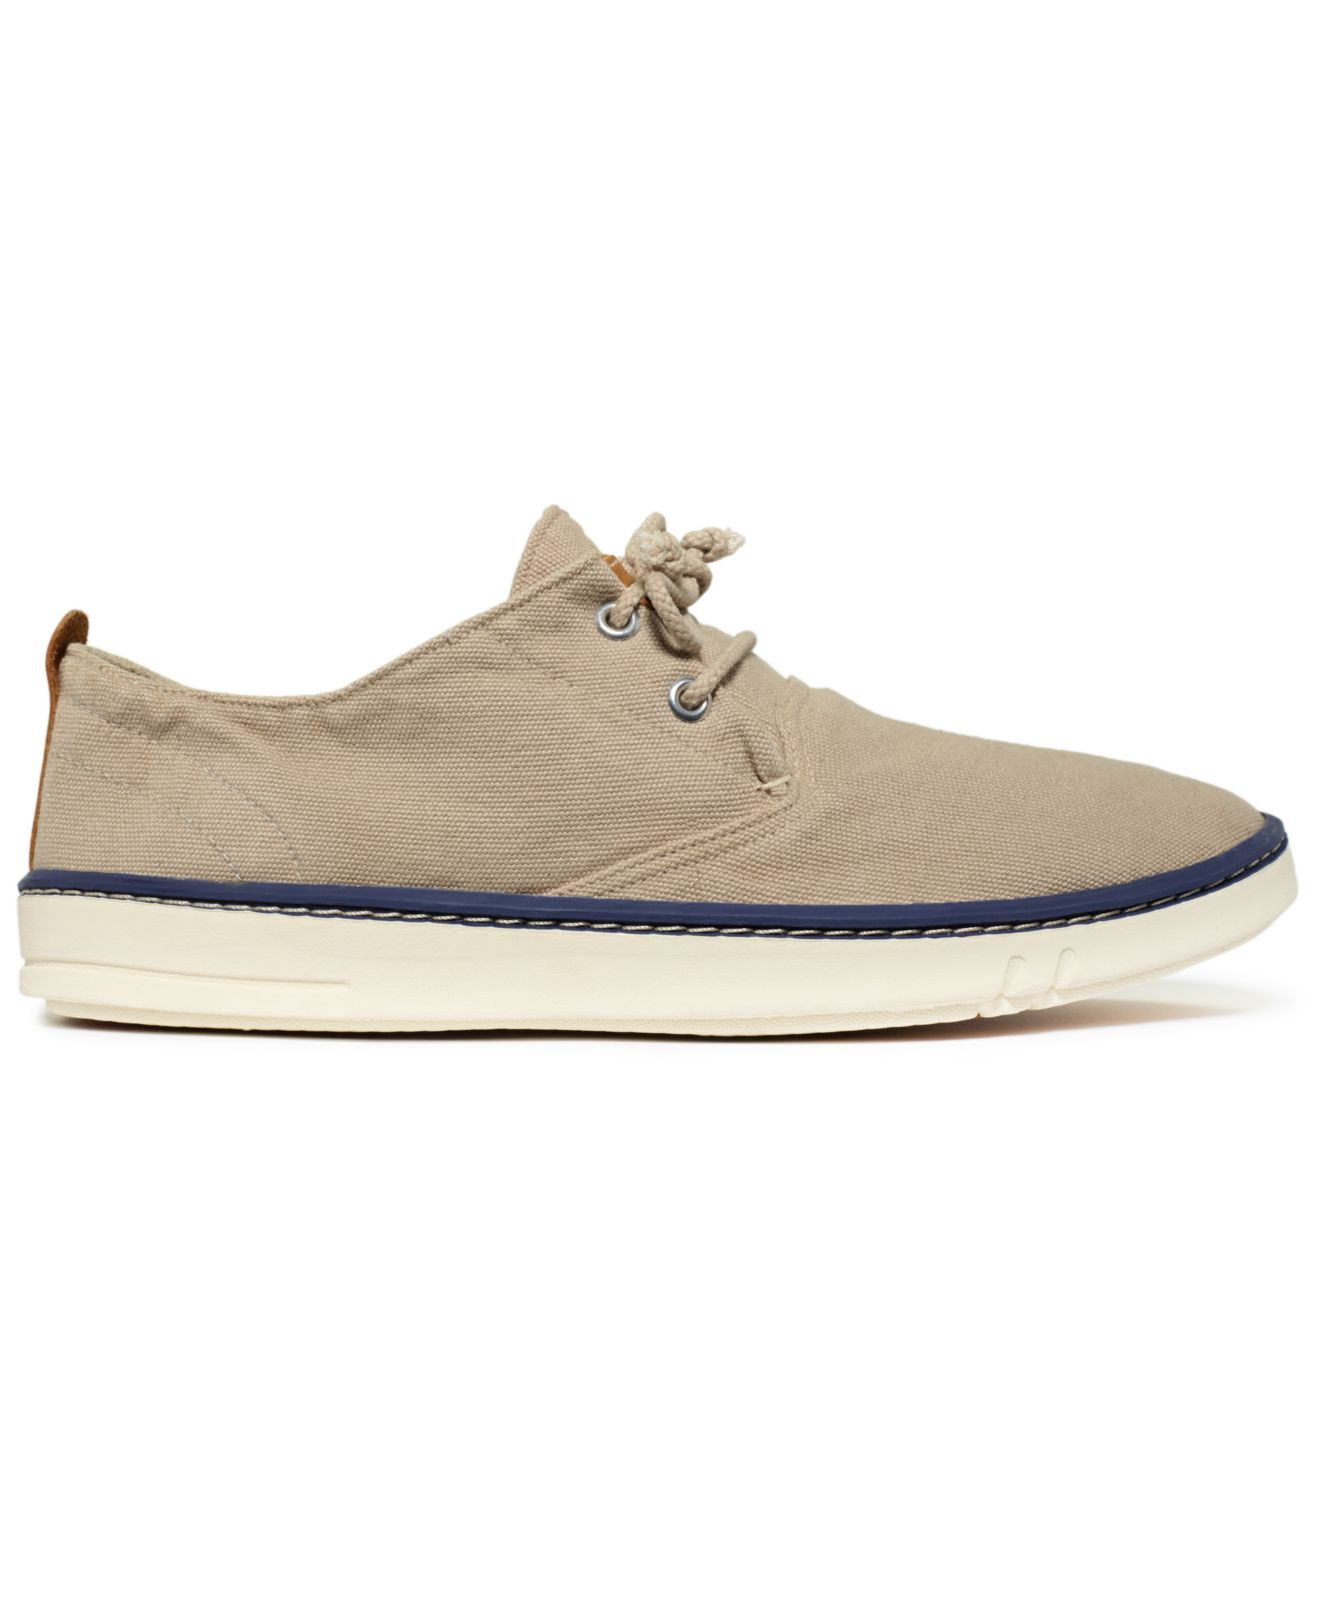 Timberland Earthkeepers Hookset Handcrafted Canvas Oxfords in Natural for  Men - Lyst